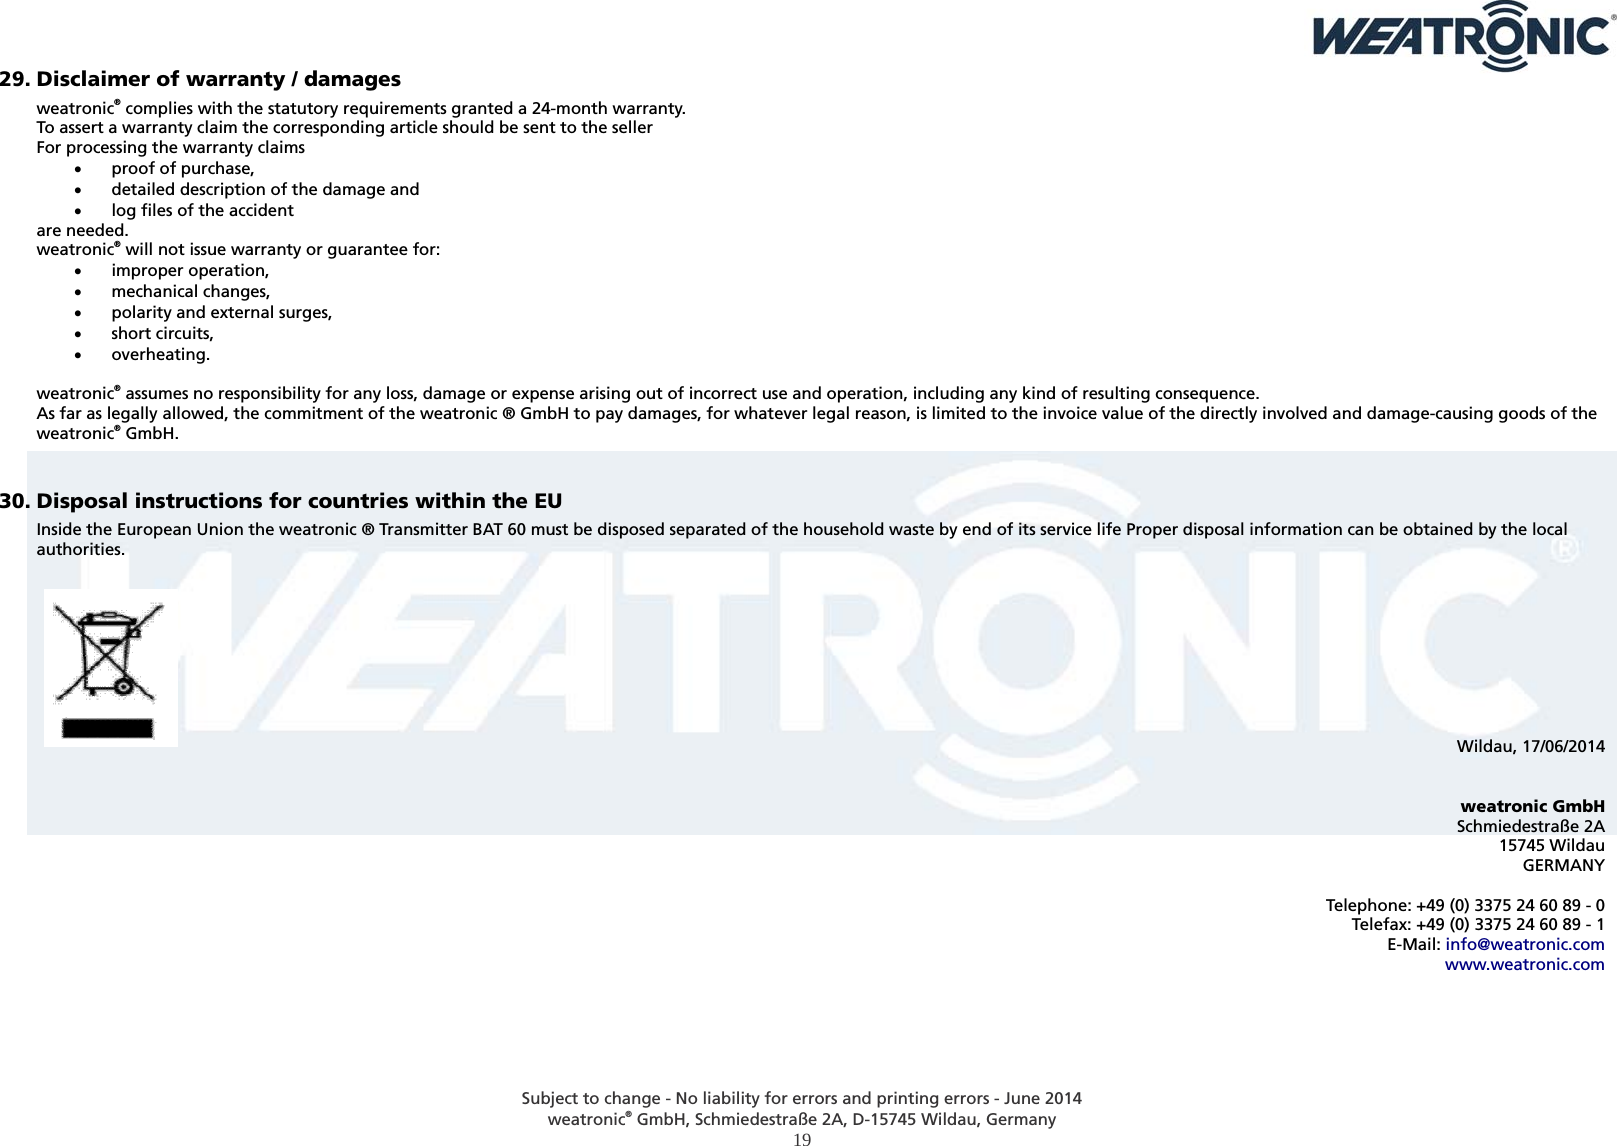  Subject to change - No liability for errors and printing errors - June 2014 weatronic® GmbH, Schmiedestraße 2A, D-15745 Wildau, Germany  19 29. Disclaimer of warranty / damages weatronic® complies with the statutory requirements granted a 24-month warranty. To assert a warranty claim the corresponding article should be sent to the seller For processing the warranty claims  proof of purchase,  detailed description of the damage and  log files of the accident are needed. weatronic® will not issue warranty or guarantee for:  improper operation,  mechanical changes,  polarity and external surges,  short circuits,  overheating.  weatronic® assumes no responsibility for any loss, damage or expense arising out of incorrect use and operation, including any kind of resulting consequence.  As far as legally allowed, the commitment of the weatronic ® GmbH to pay damages, for whatever legal reason, is limited to the invoice value of the directly involved and damage-causing goods of the weatronic® GmbH.  30. Disposal instructions for countries within the EU Inside the European Union the weatronic ® Transmitter BAT 60 must be disposed separated of the household waste by end of its service life Proper disposal information can be obtained by the local authorities.          Wildau, 17/06/2014   weatronic GmbH Schmiedestraße 2A 15745 Wildau GERMANY  Telephone: +49 (0) 3375 24 60 89 - 0 Telefax: +49 (0) 3375 24 60 89 - 1 E-Mail: info@weatronic.com www.weatronic.com  